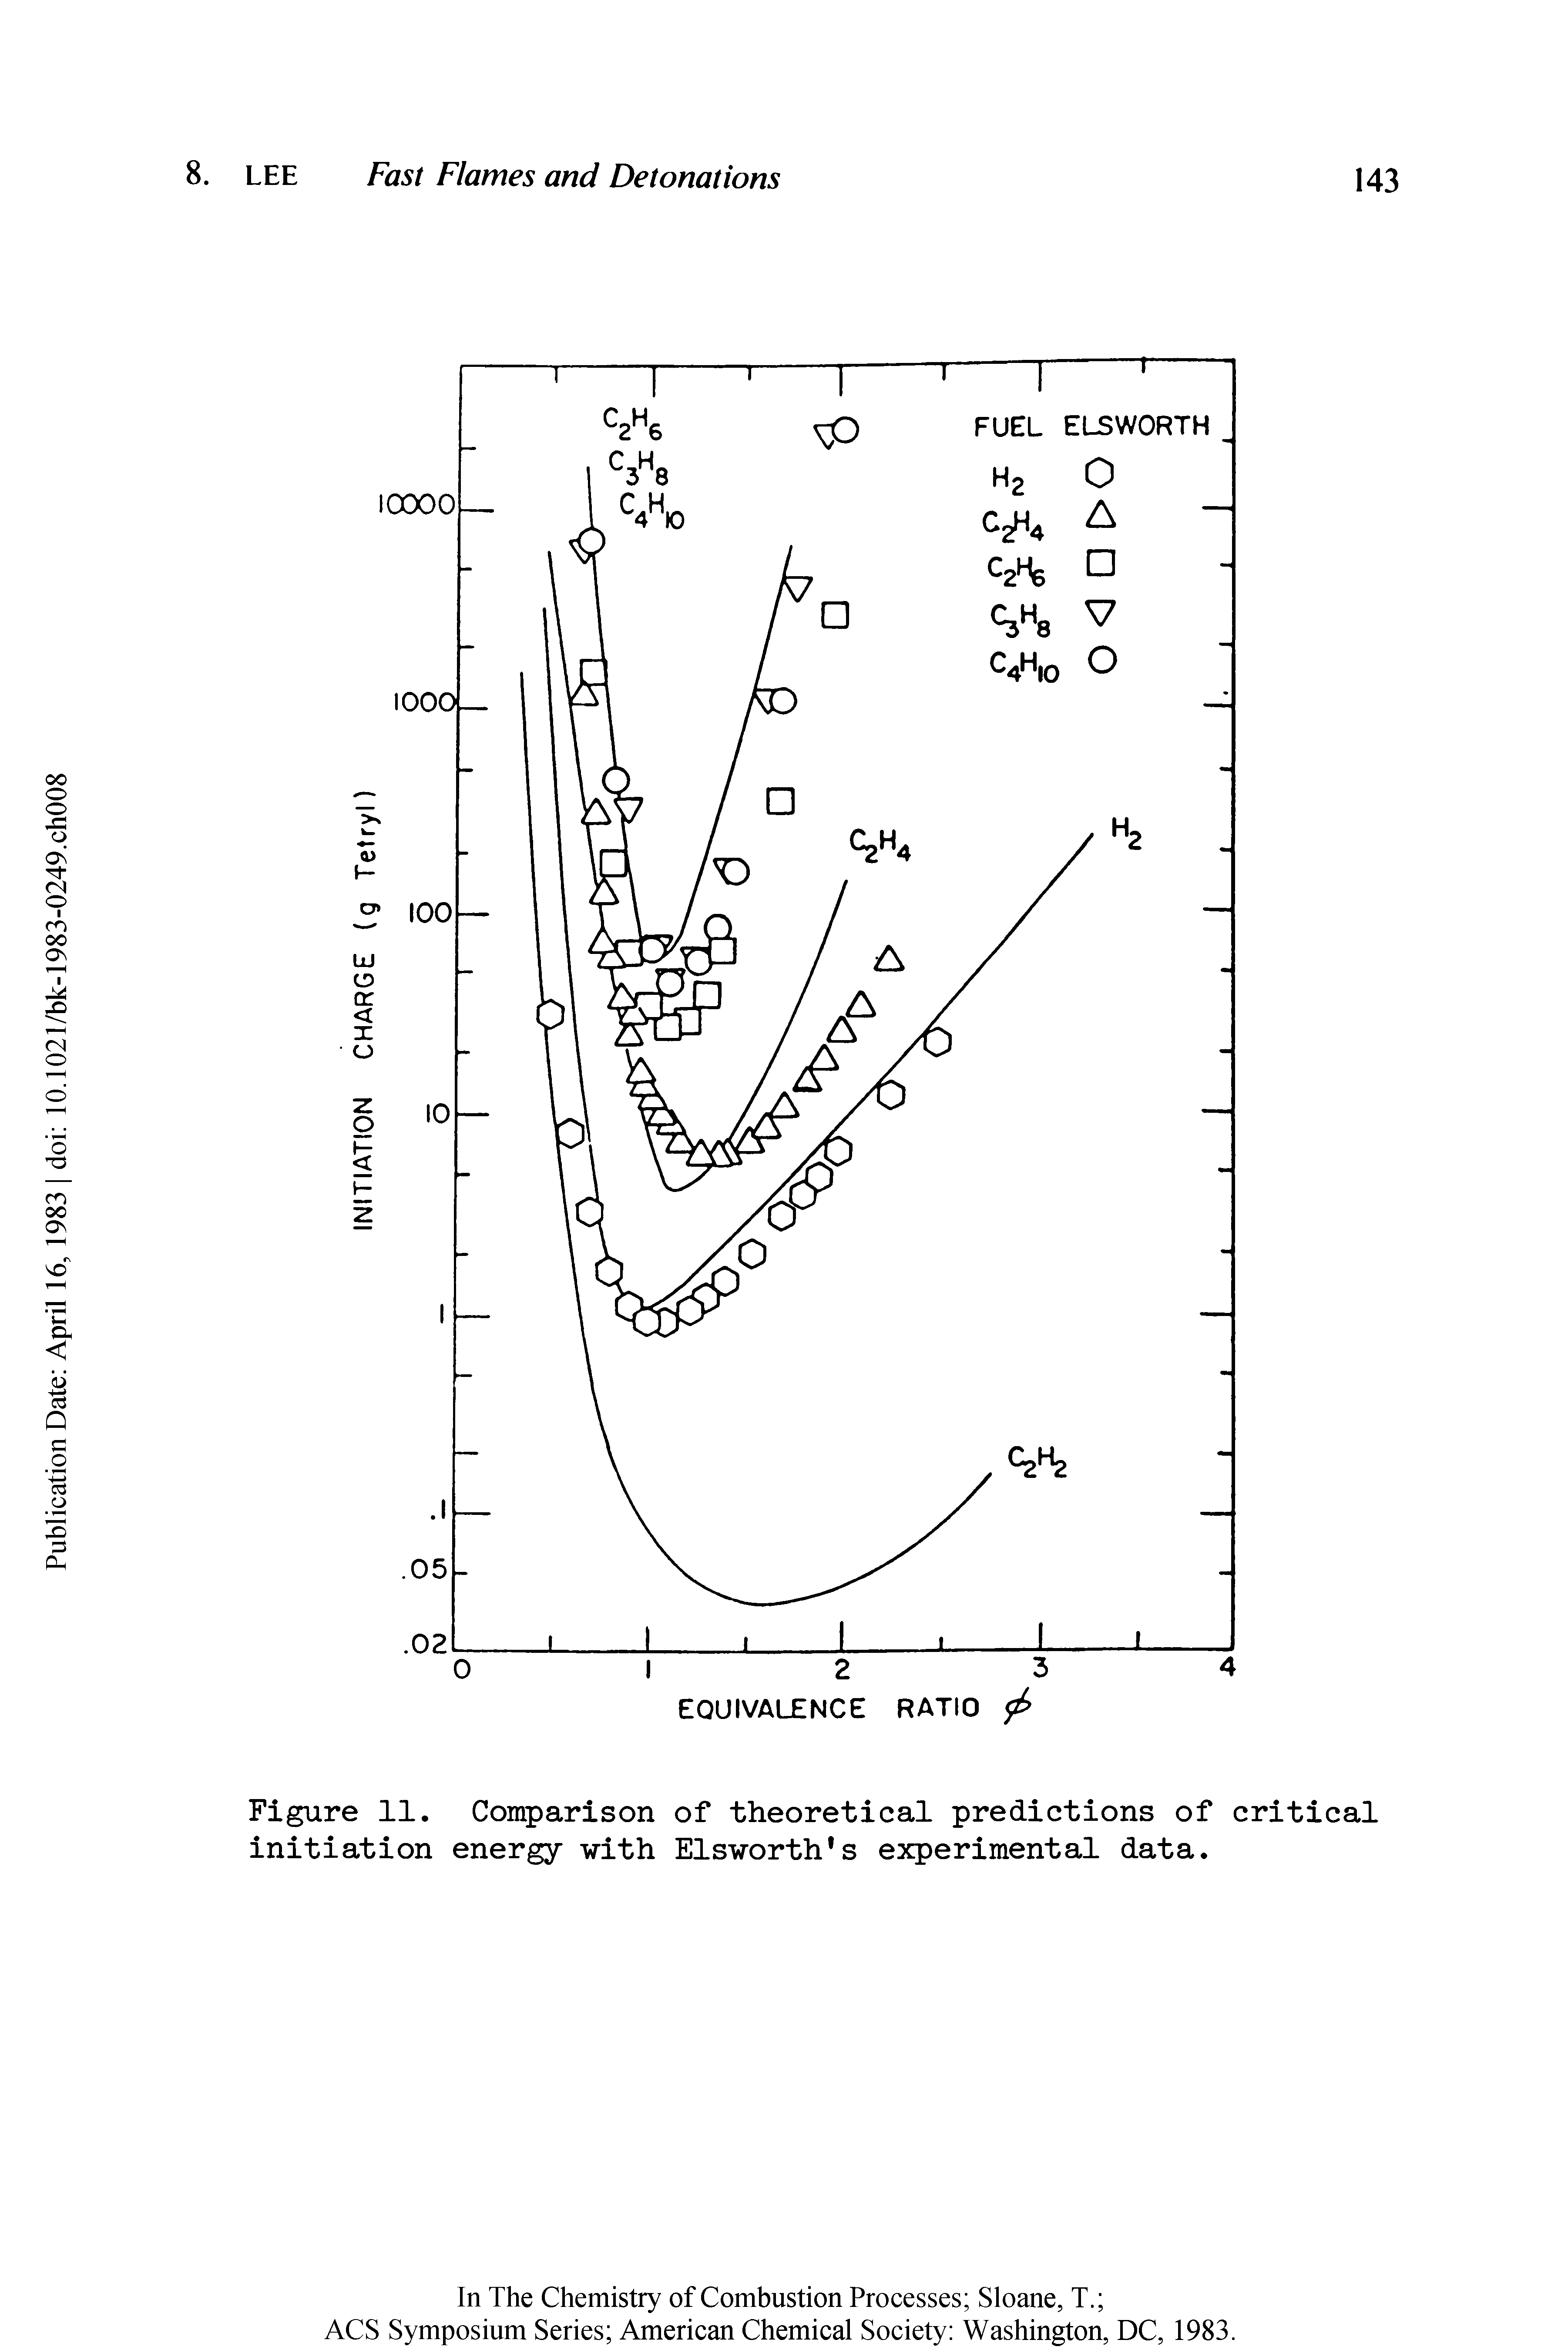 Figure 11. Comparison of theoretical predictions of critical initiation energy with Elsworth s experimental data.